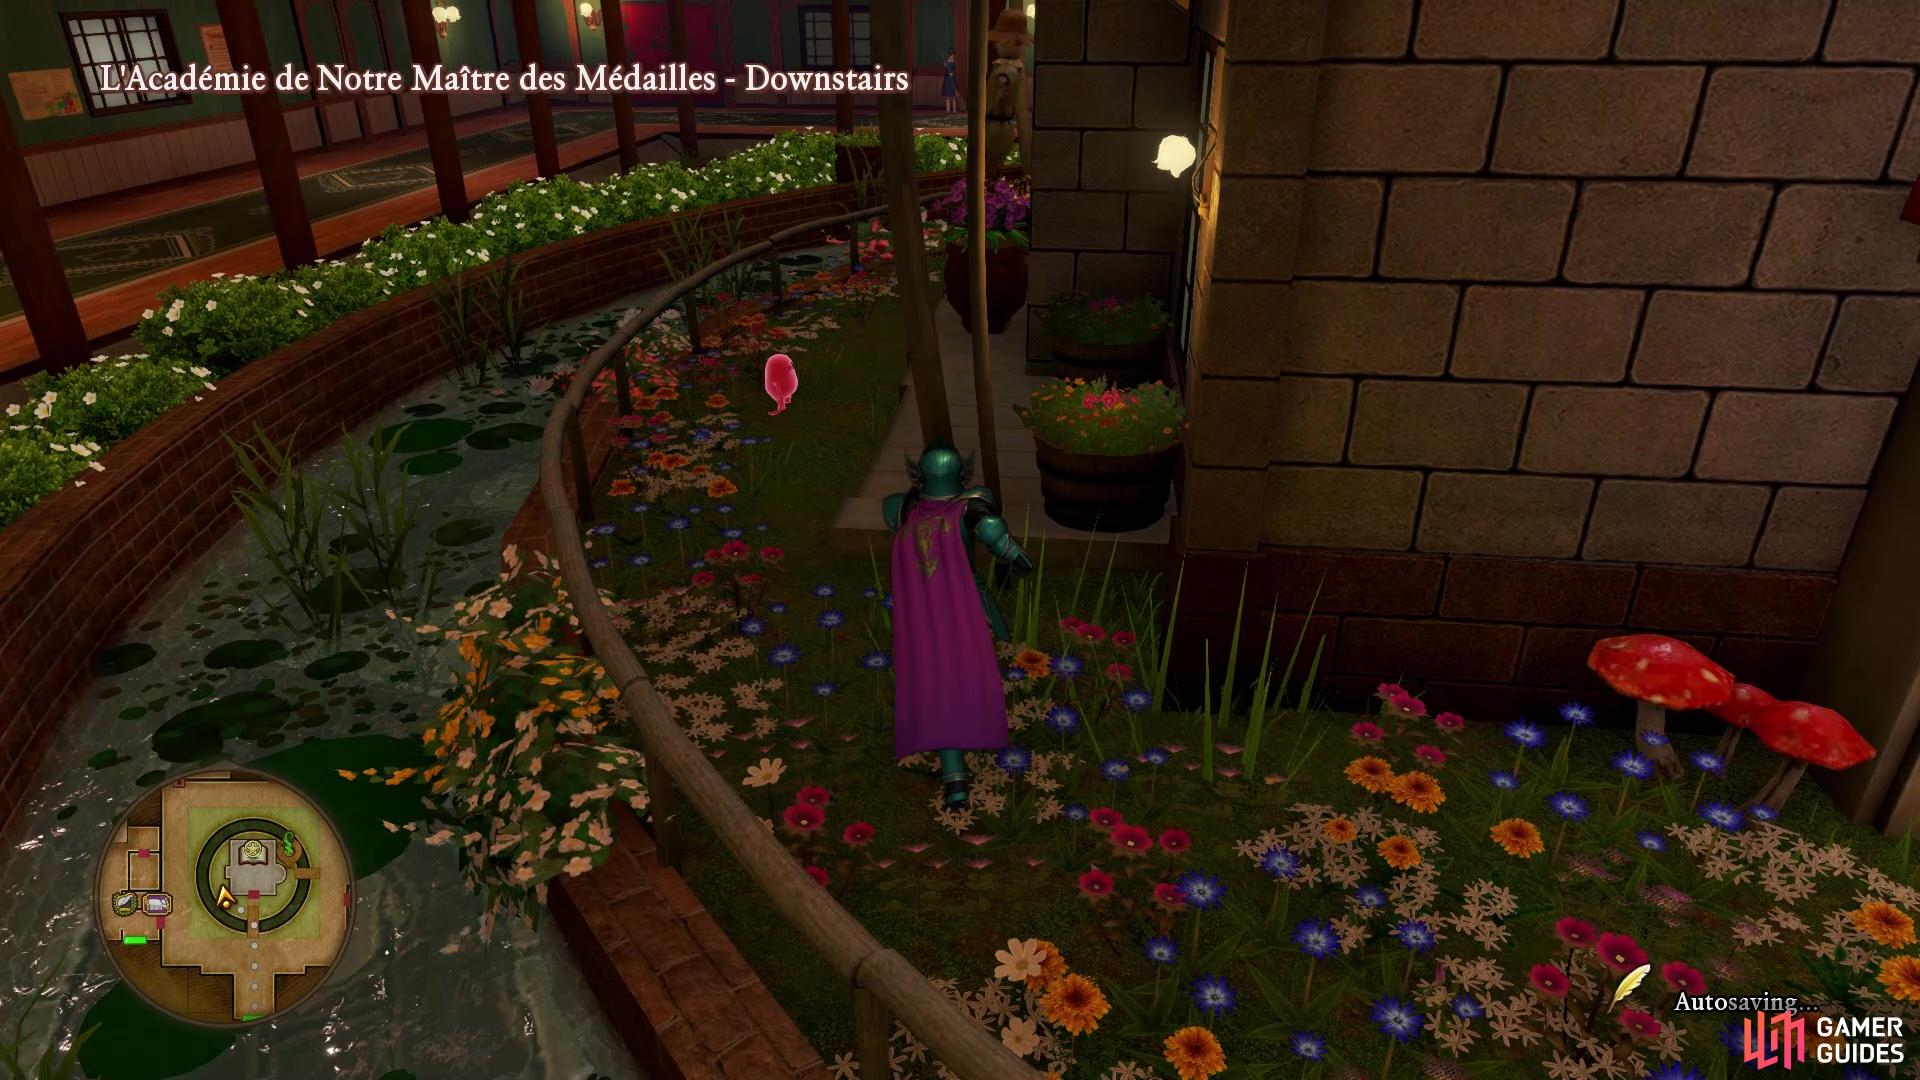 The Tockle that leads you to the Neverglade is right next to Maxime’s office at the Medal Academy